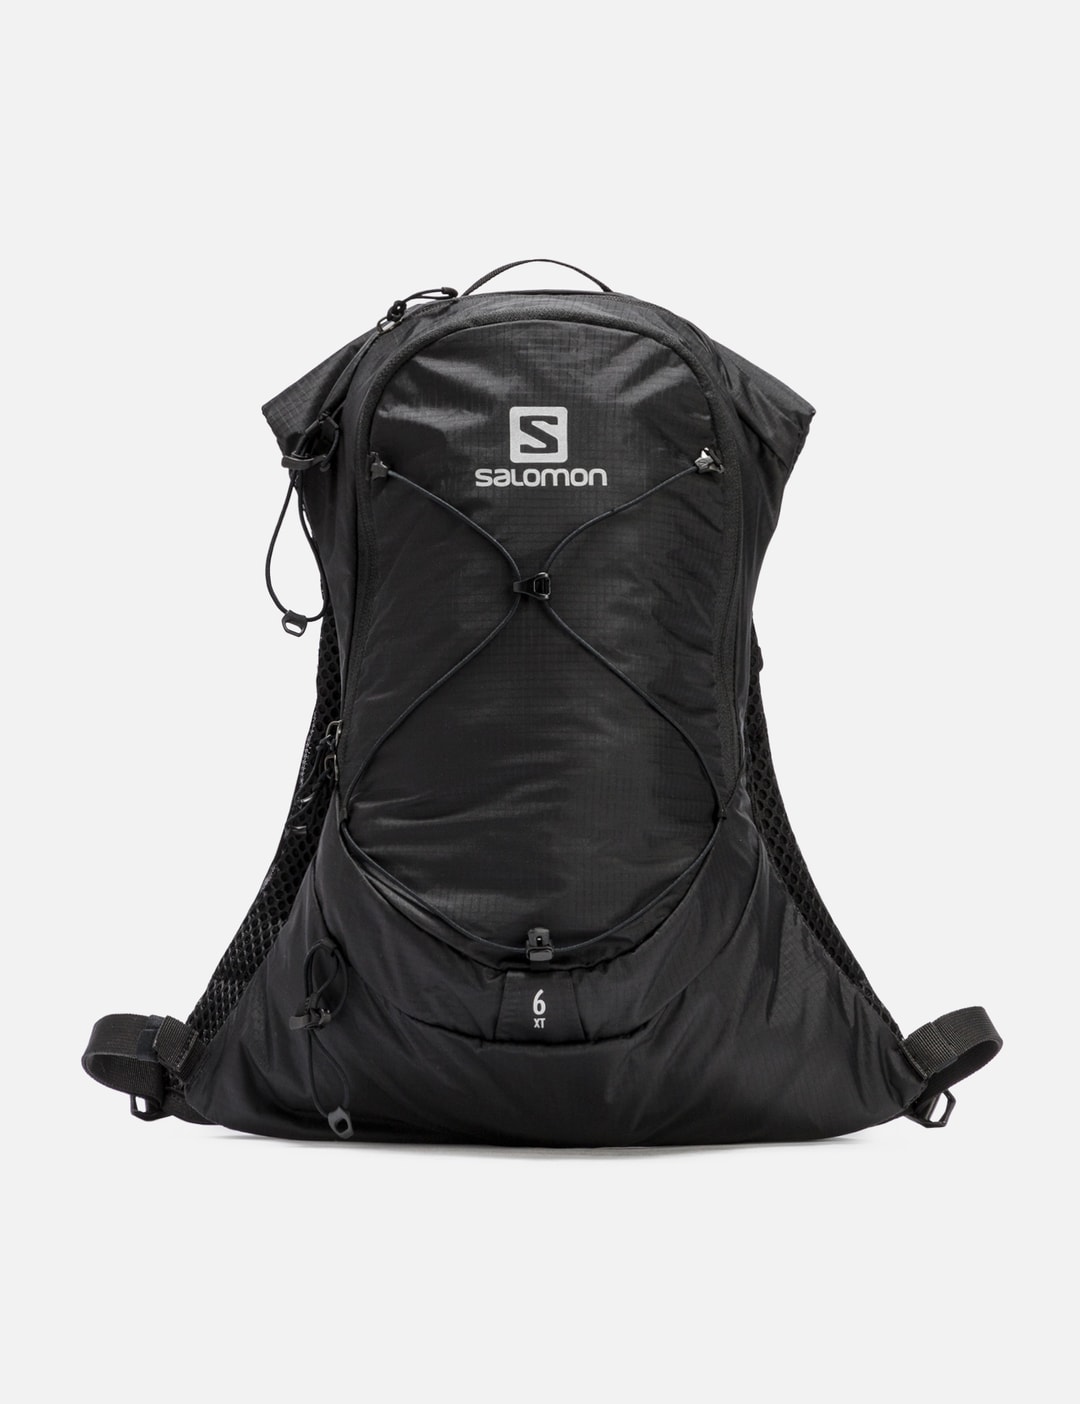 Salomon - | HBX Globally Curated Fashion and Lifestyle by Hypebeast